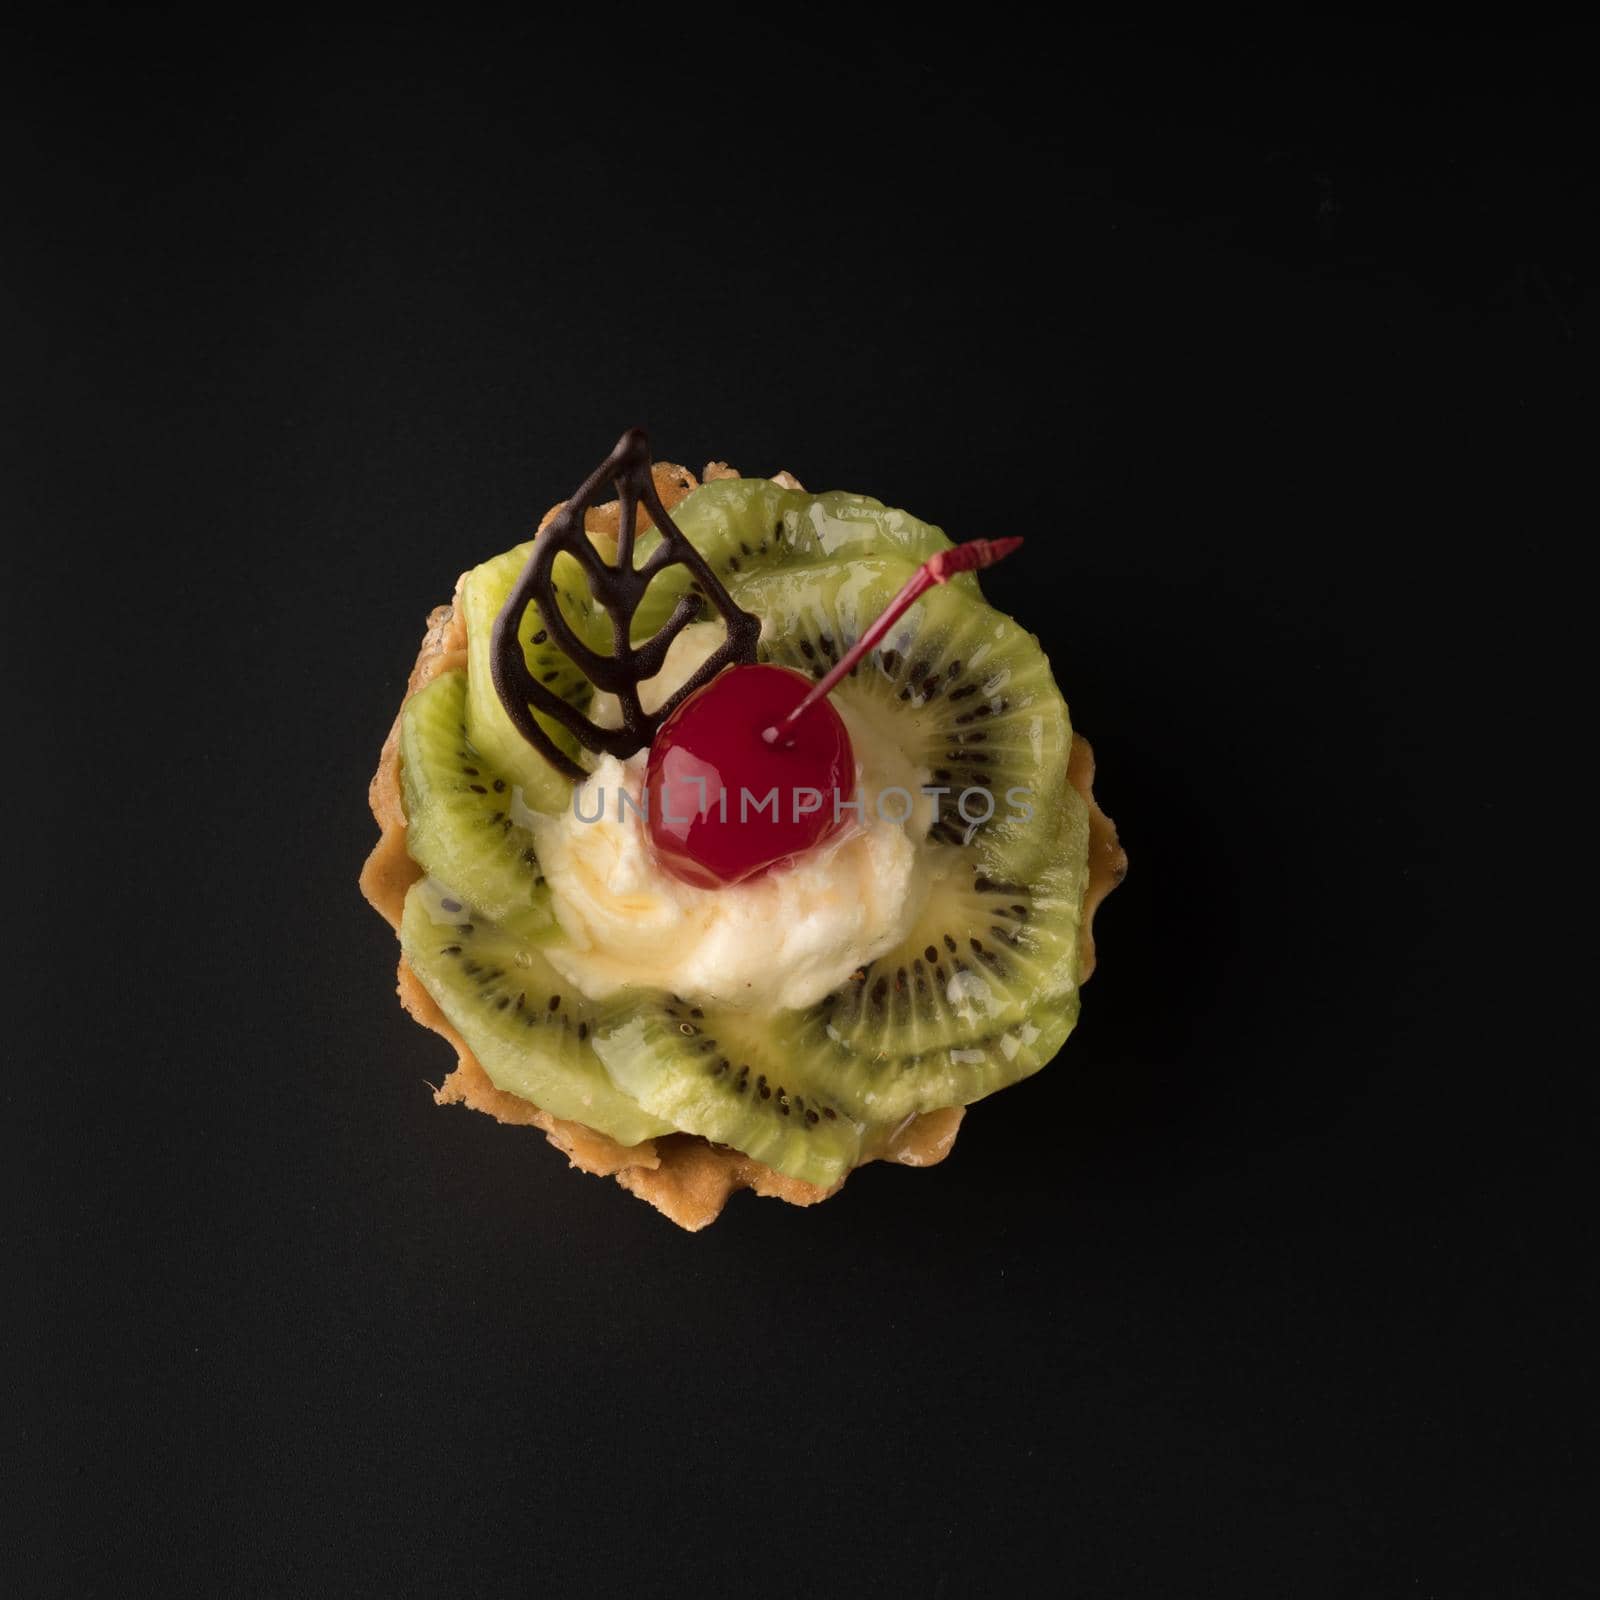 Fruit dessert cake with cherries, shecolade leaf, kiwi wedges and protein cream, on a black background isolated